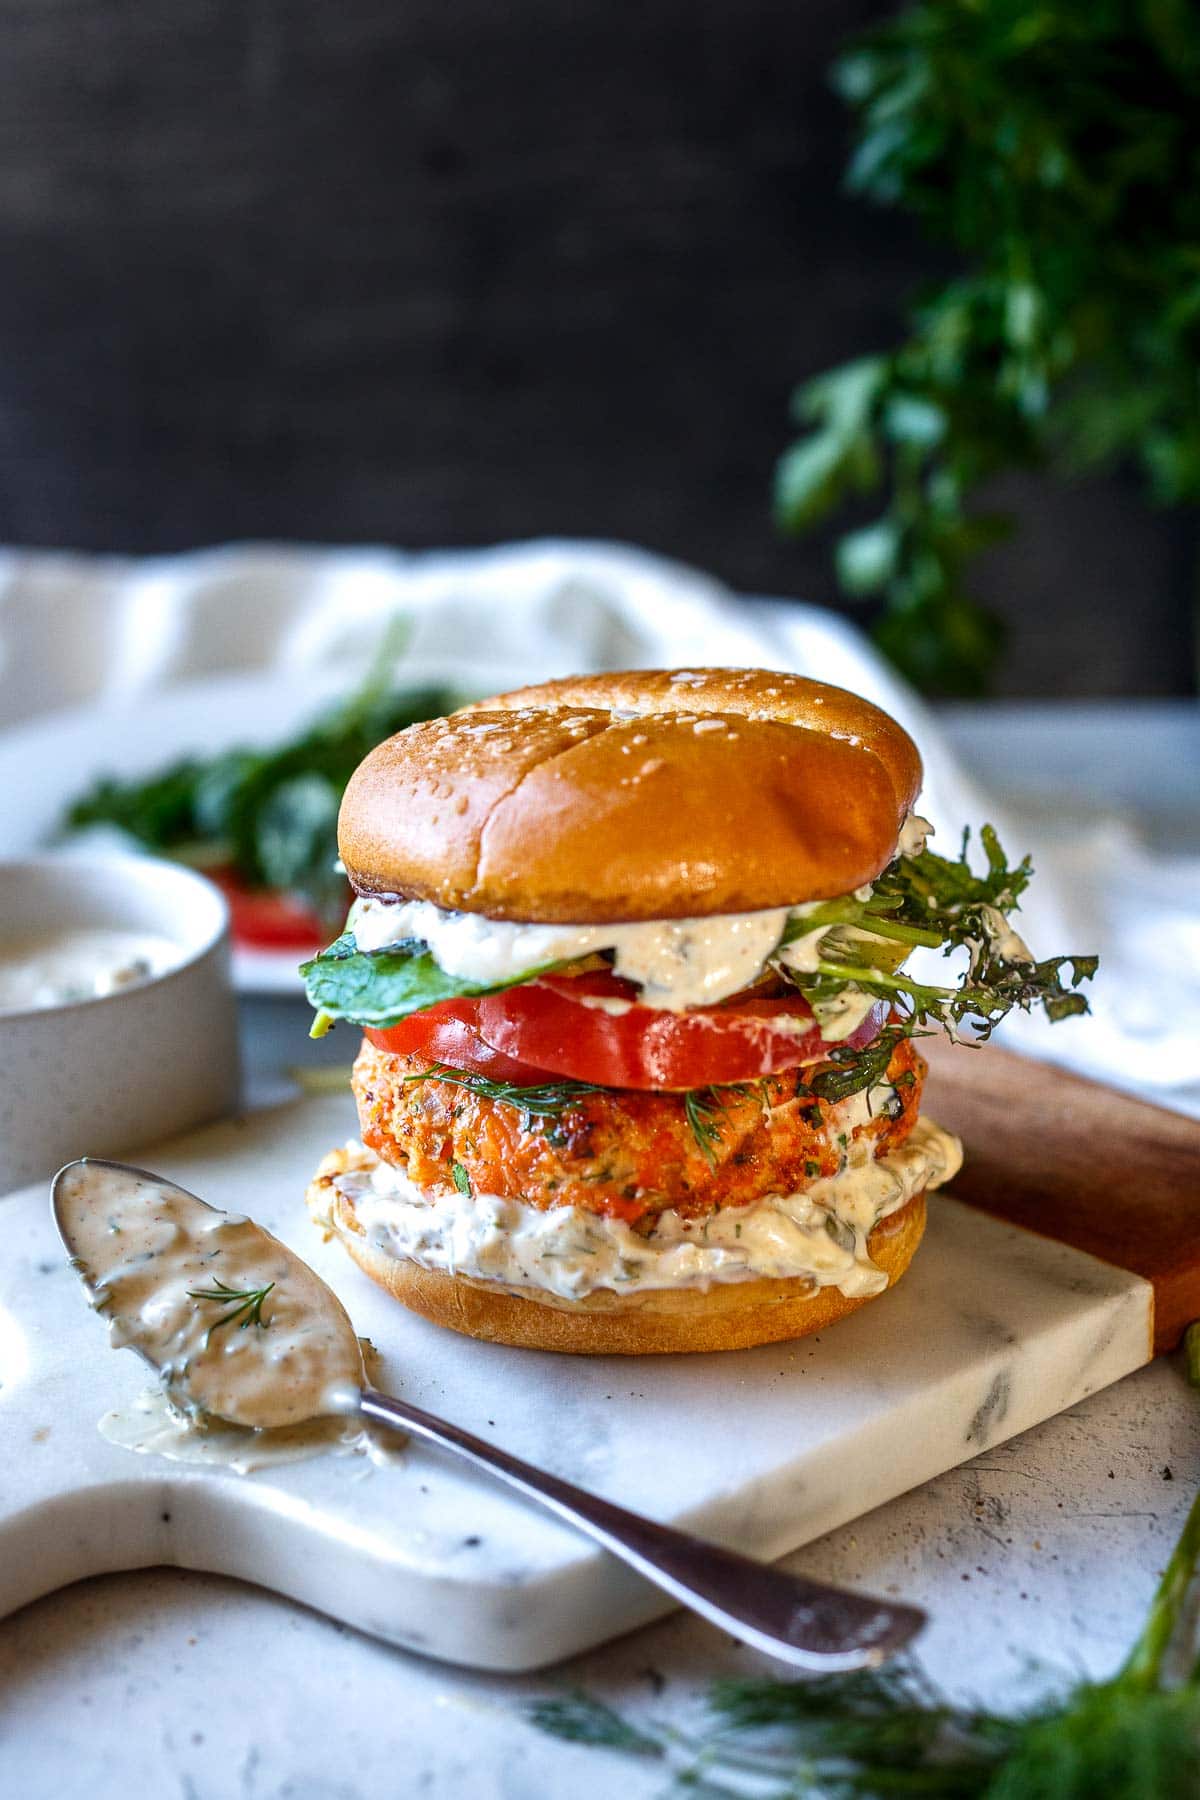 Healthy delicious Salmon Burgers are easy to make with fresh salmon! Grillable and flavorful with the best texture. A perfect summer meal bursting with delicious flavor and healthy omega-3s! 